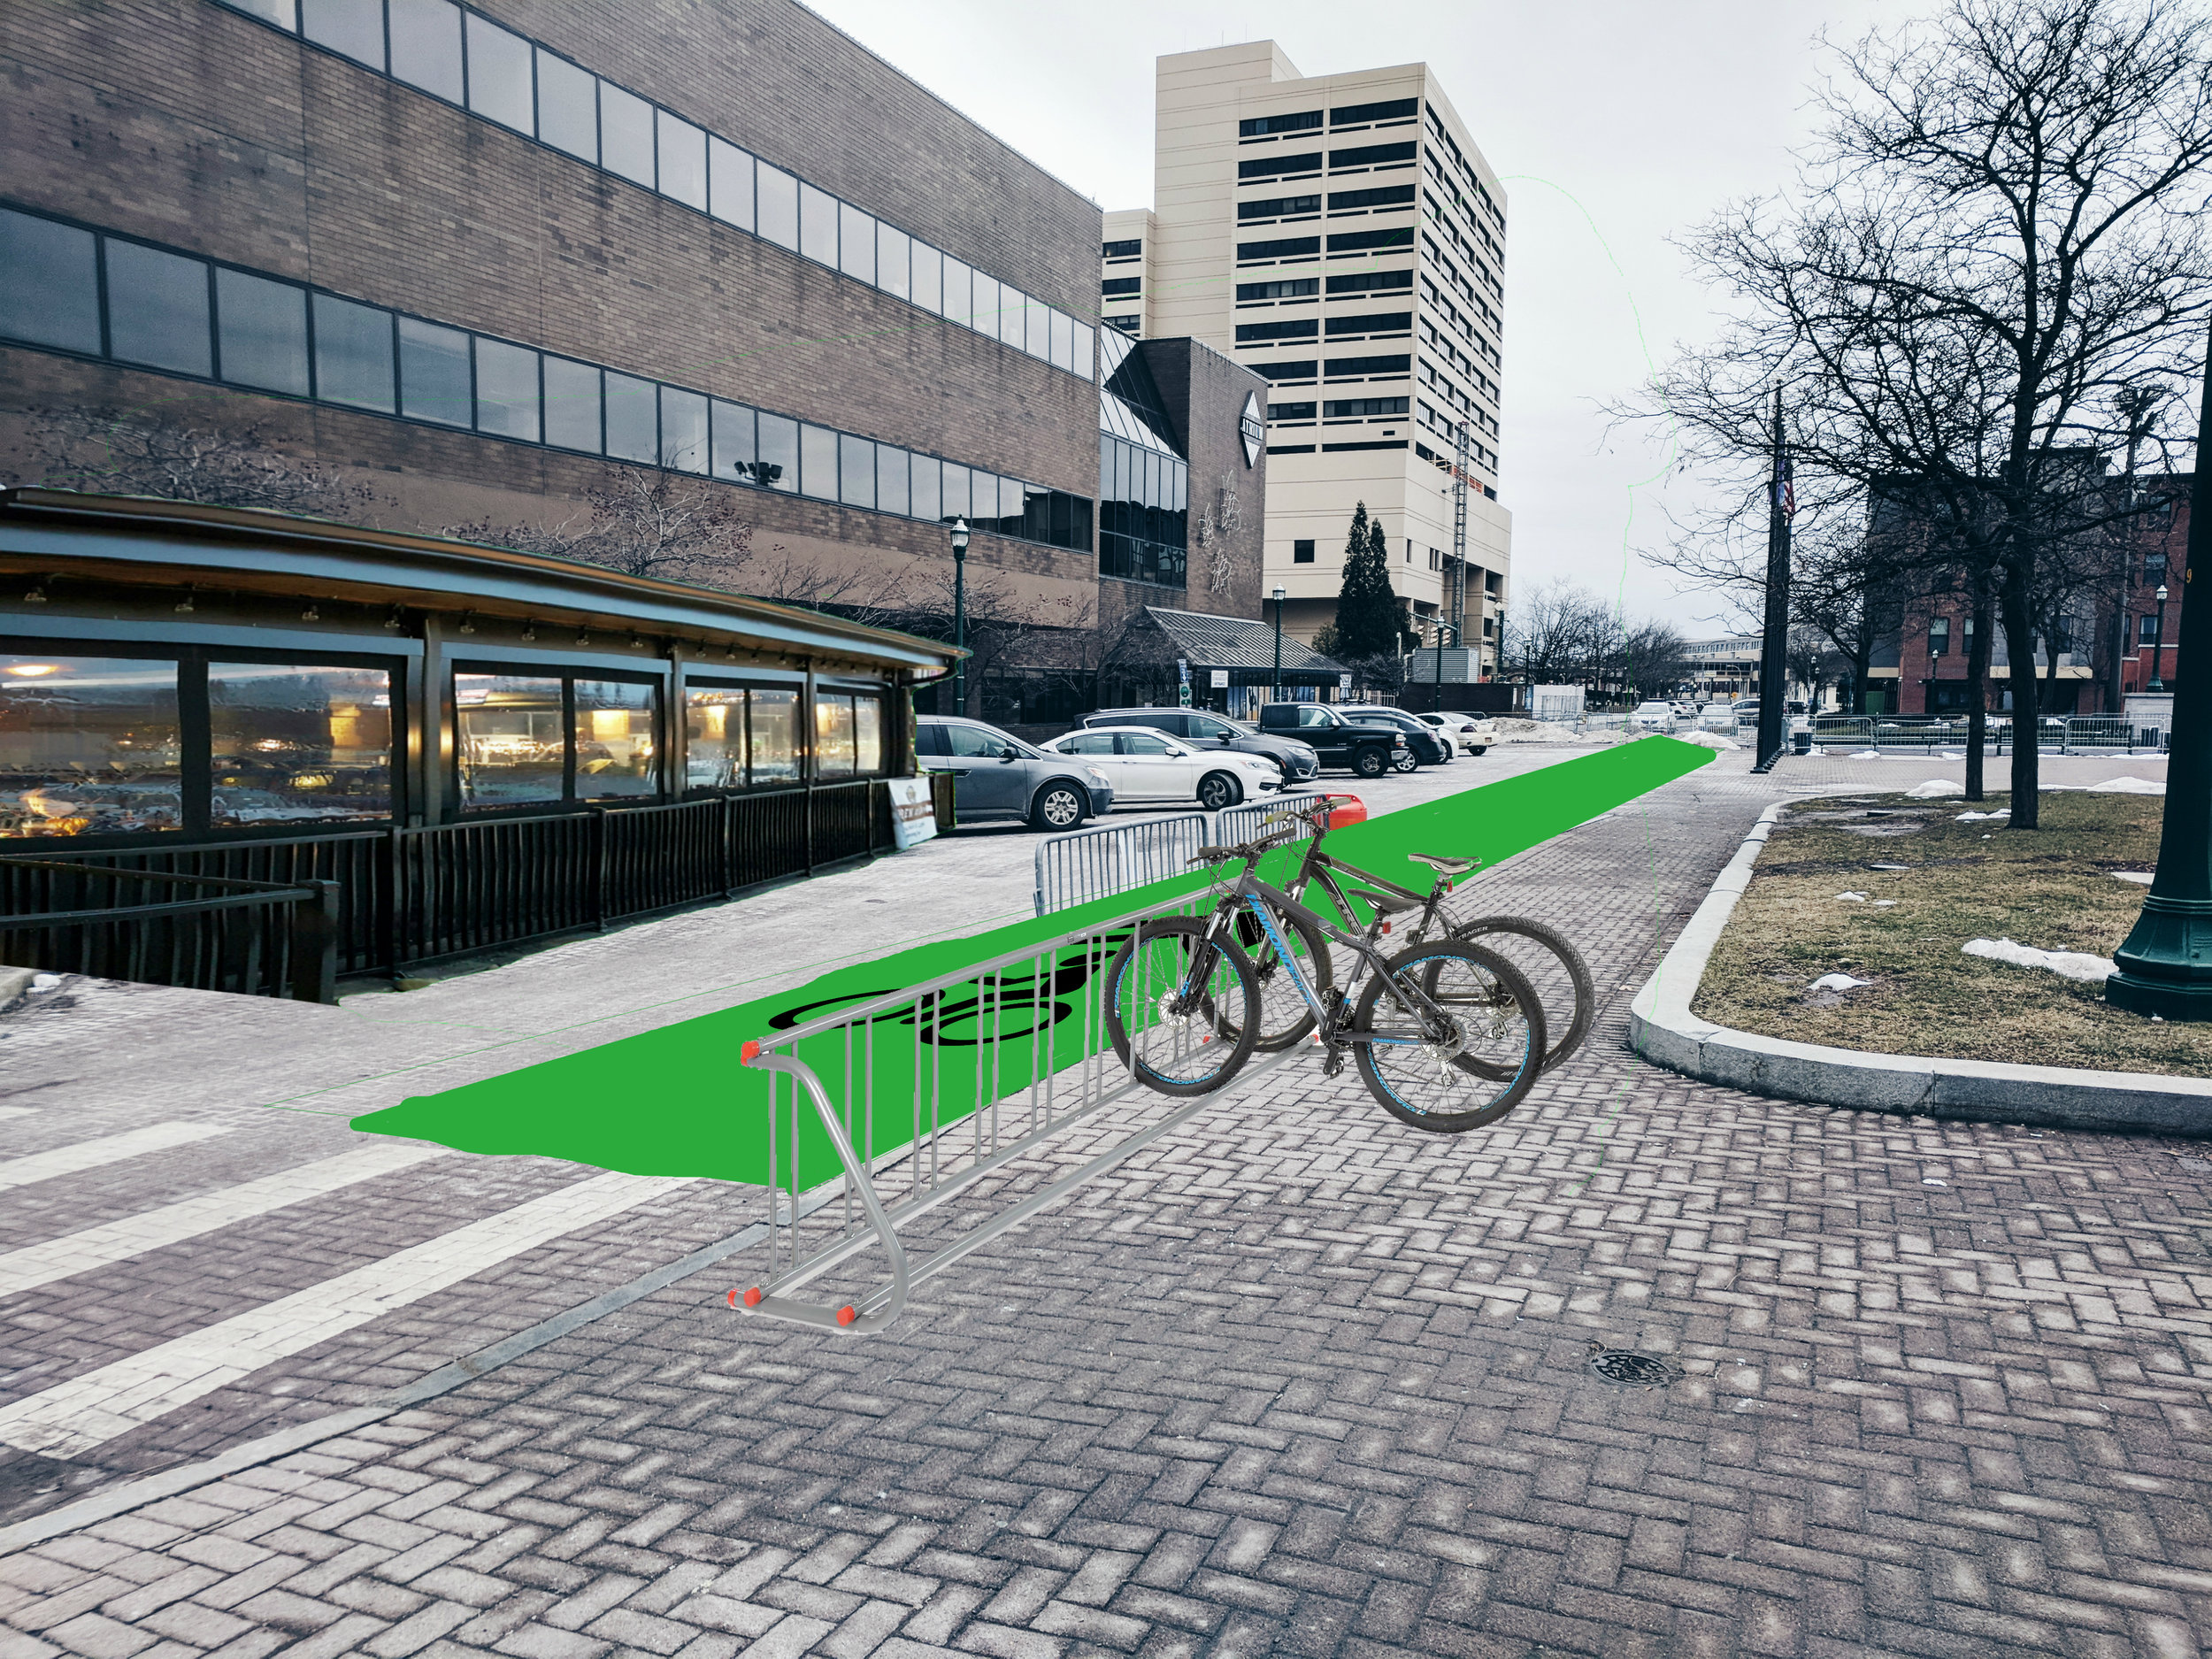  An added restaurant space to bring interest to the square, along with a large bike lane and bike rack to encourage a more active use of space. 